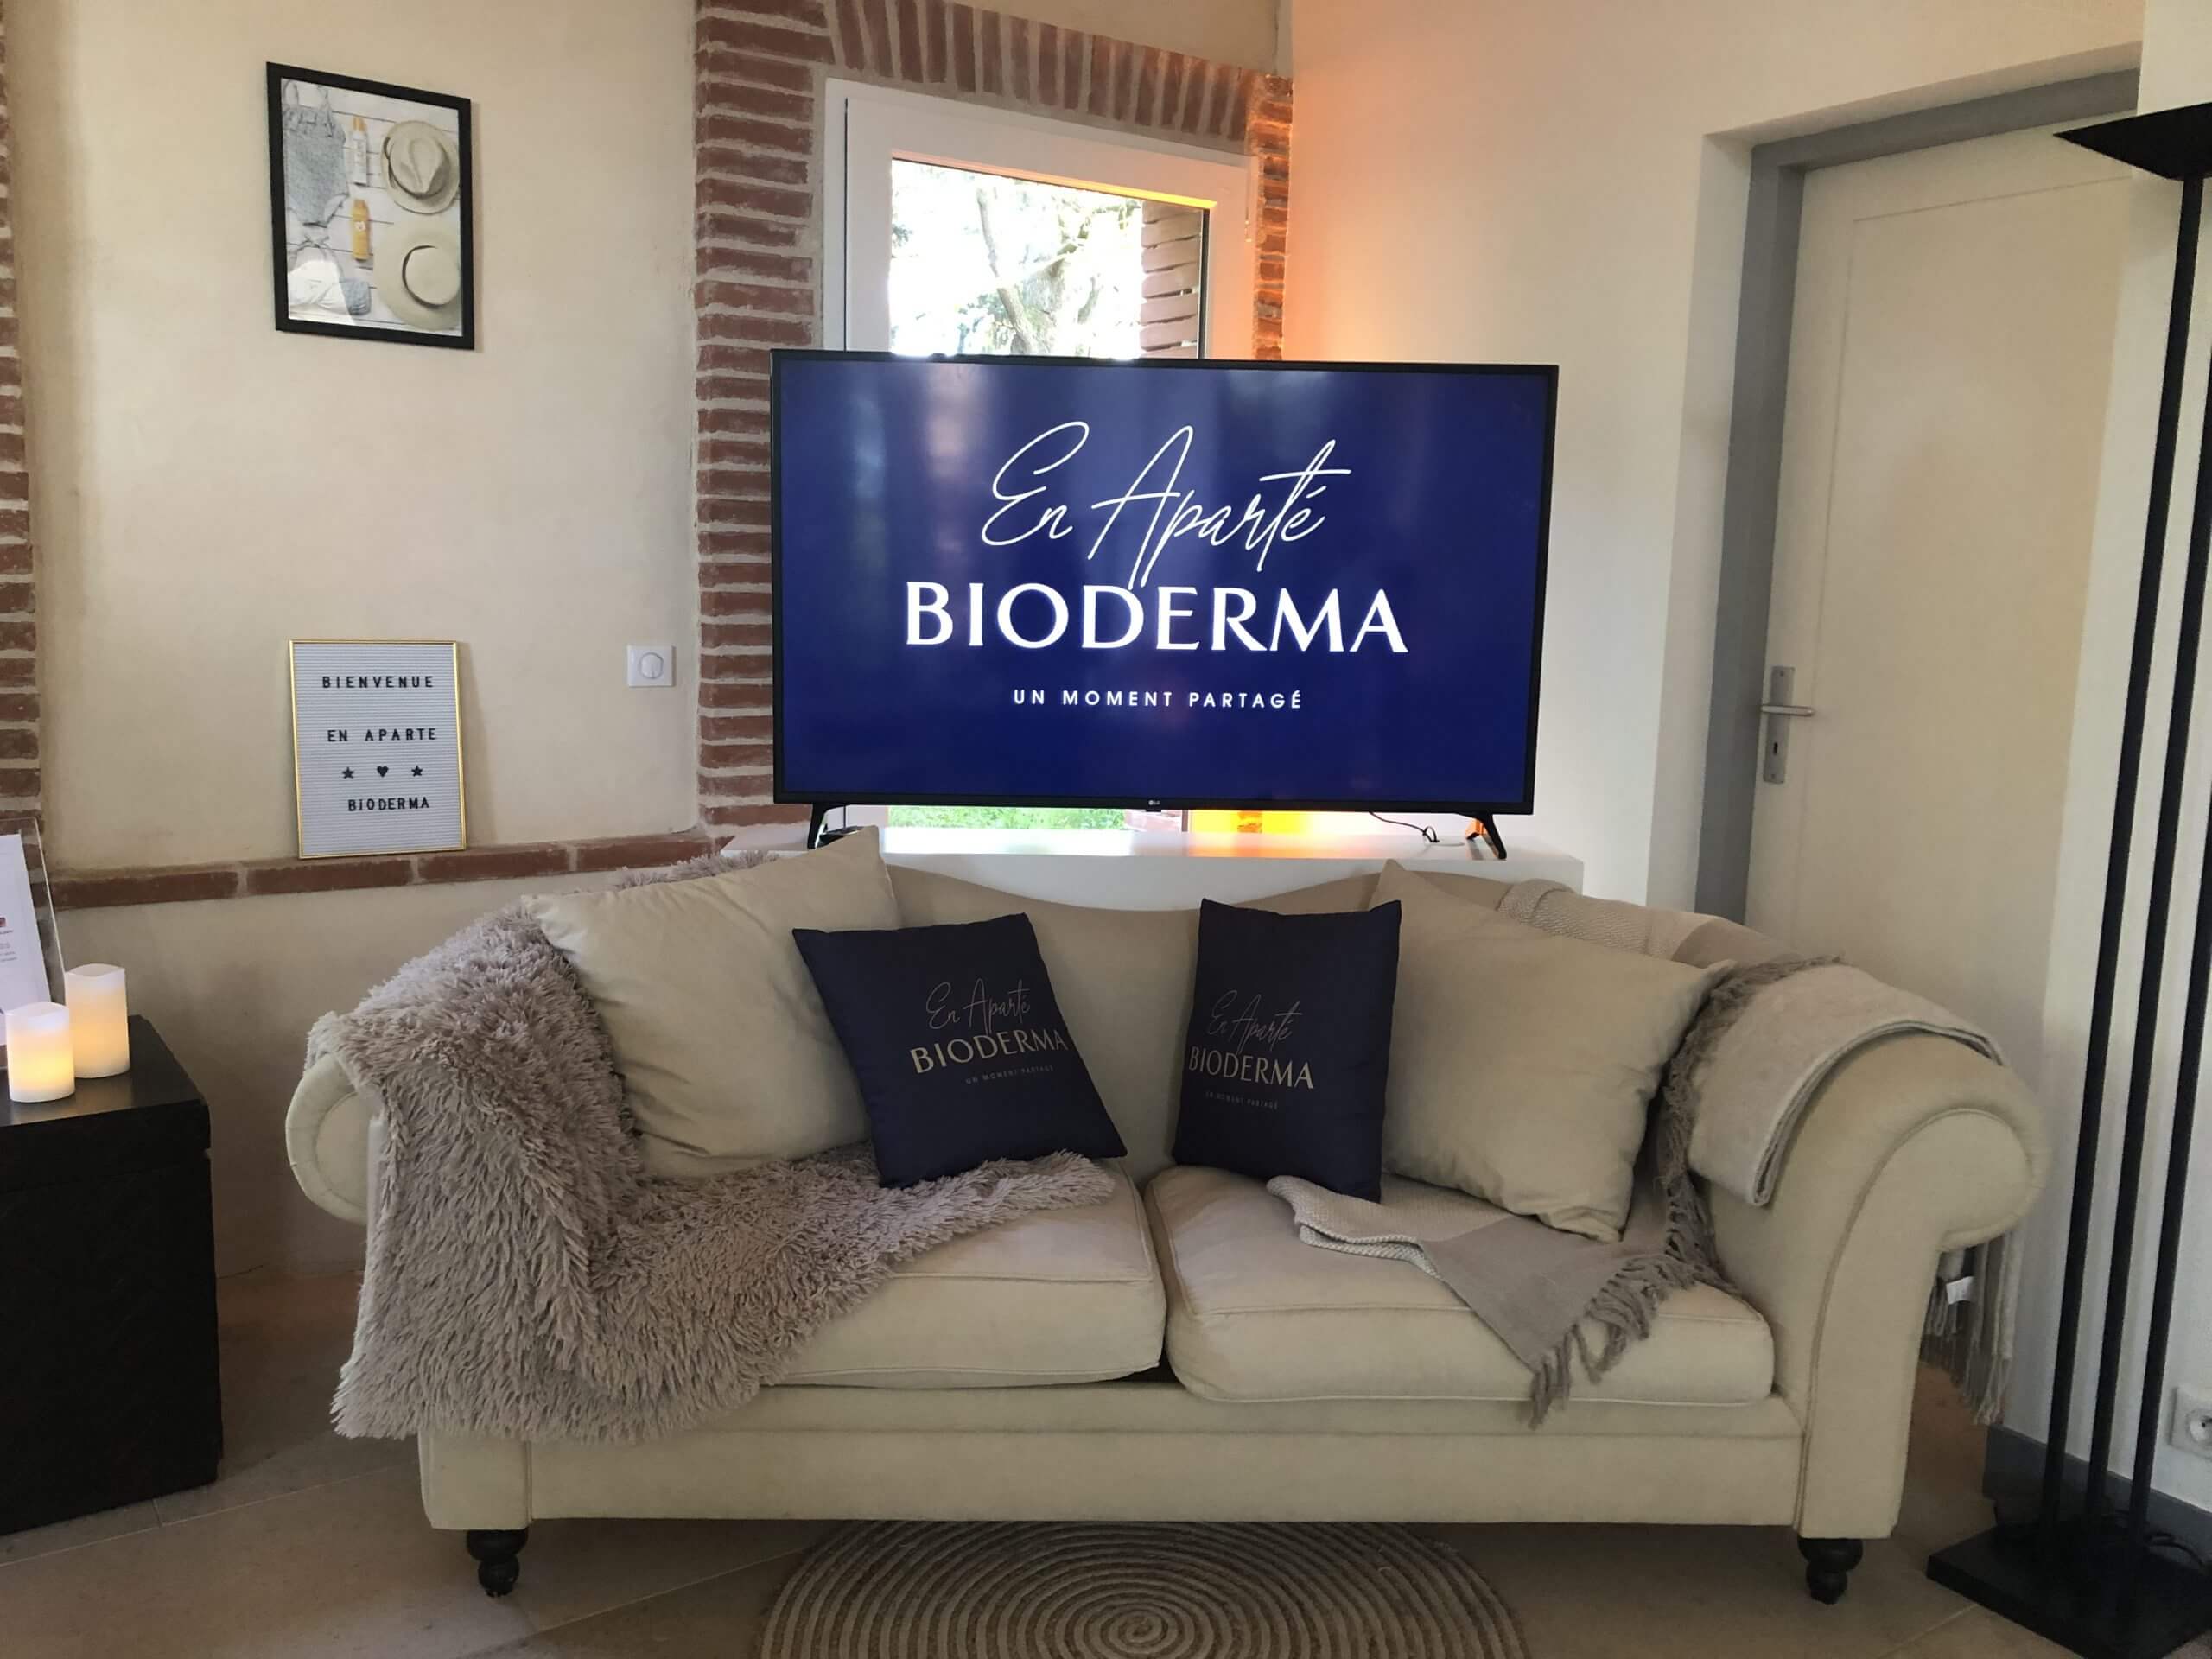 Bioderma - In private - Product launch - WMH Project